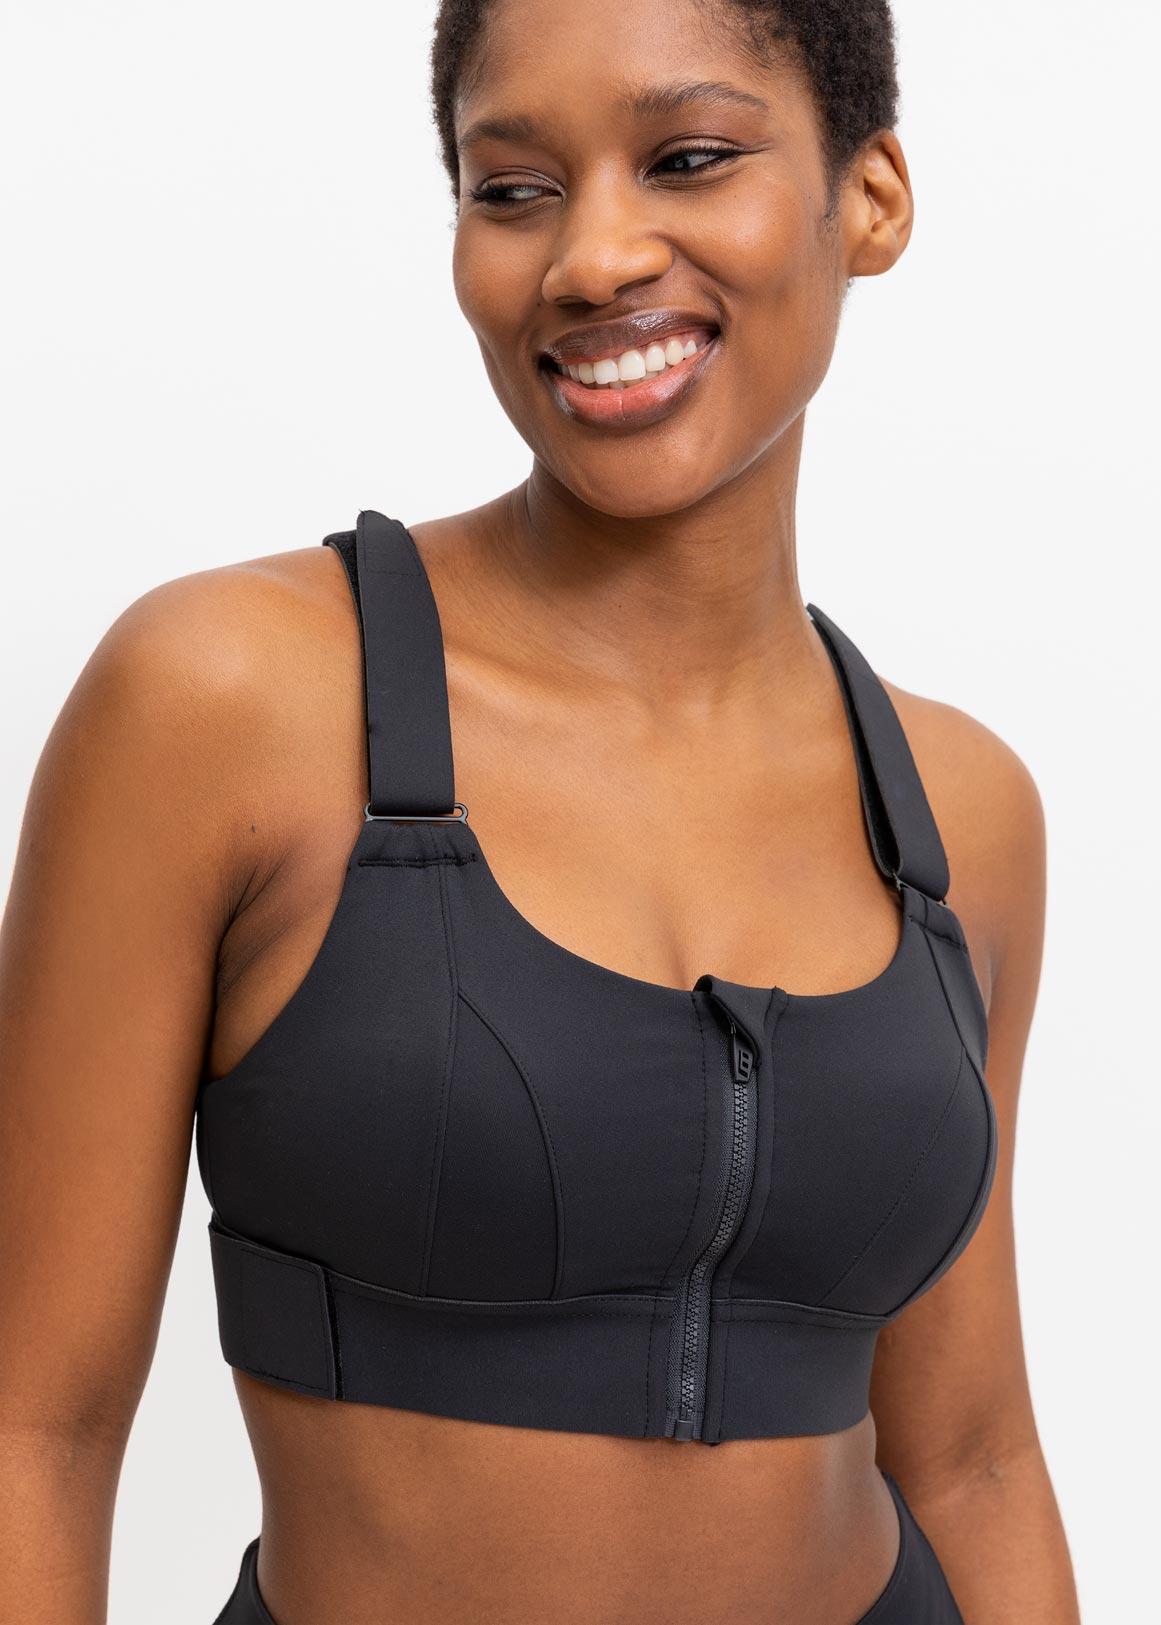 Bustier Fit Bras  Cotton On South Africa